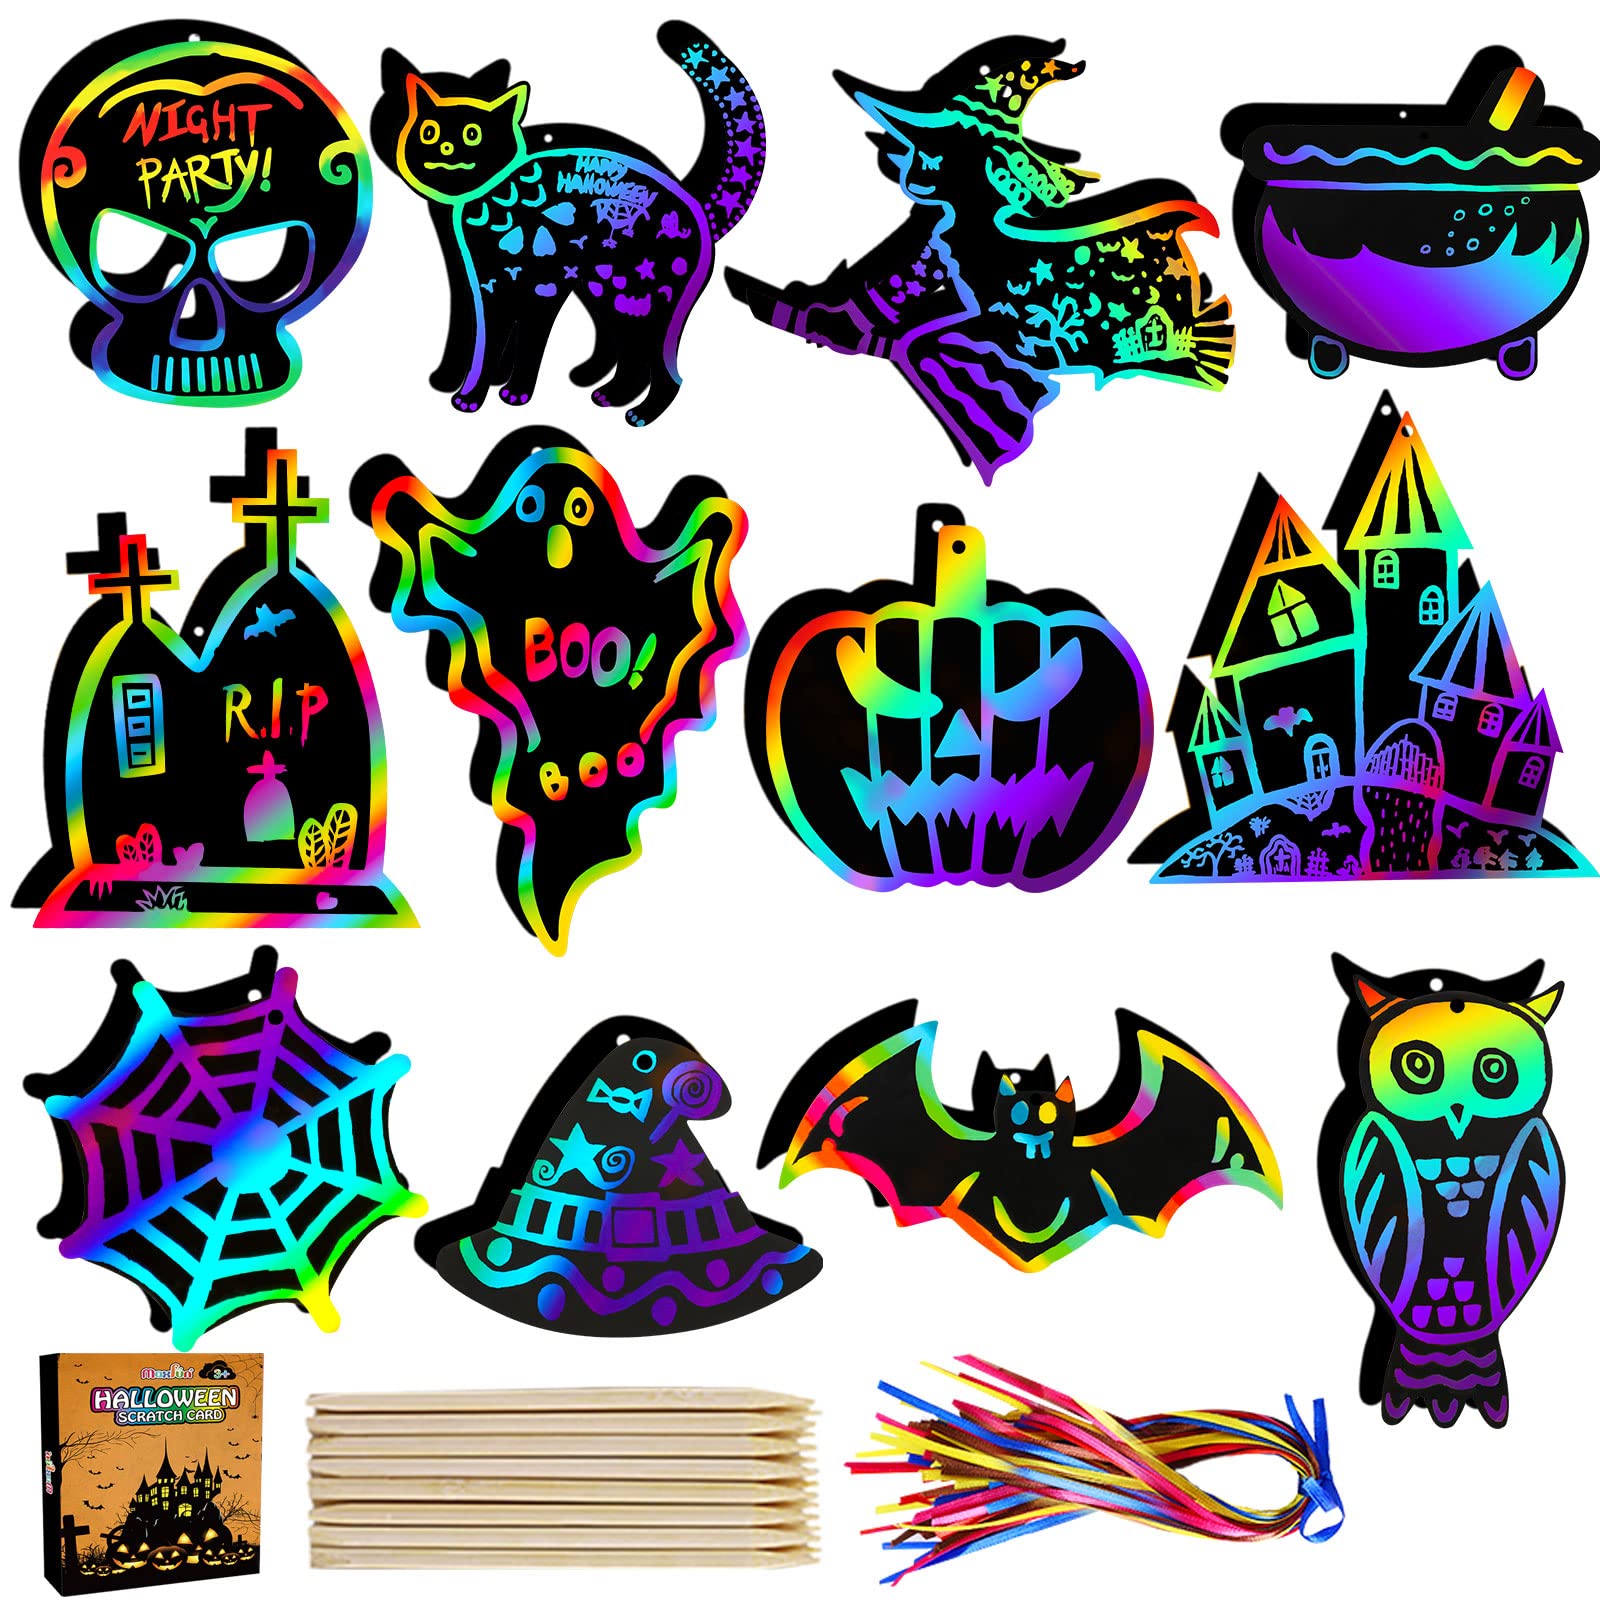 Max Fun Halloween Crafts Scratch Off Art Paper Cards 48Pack, Magic Rainbow Ornaments Hanging Supplies Educational Toys Kit Halloween Party Games Favors for Kids